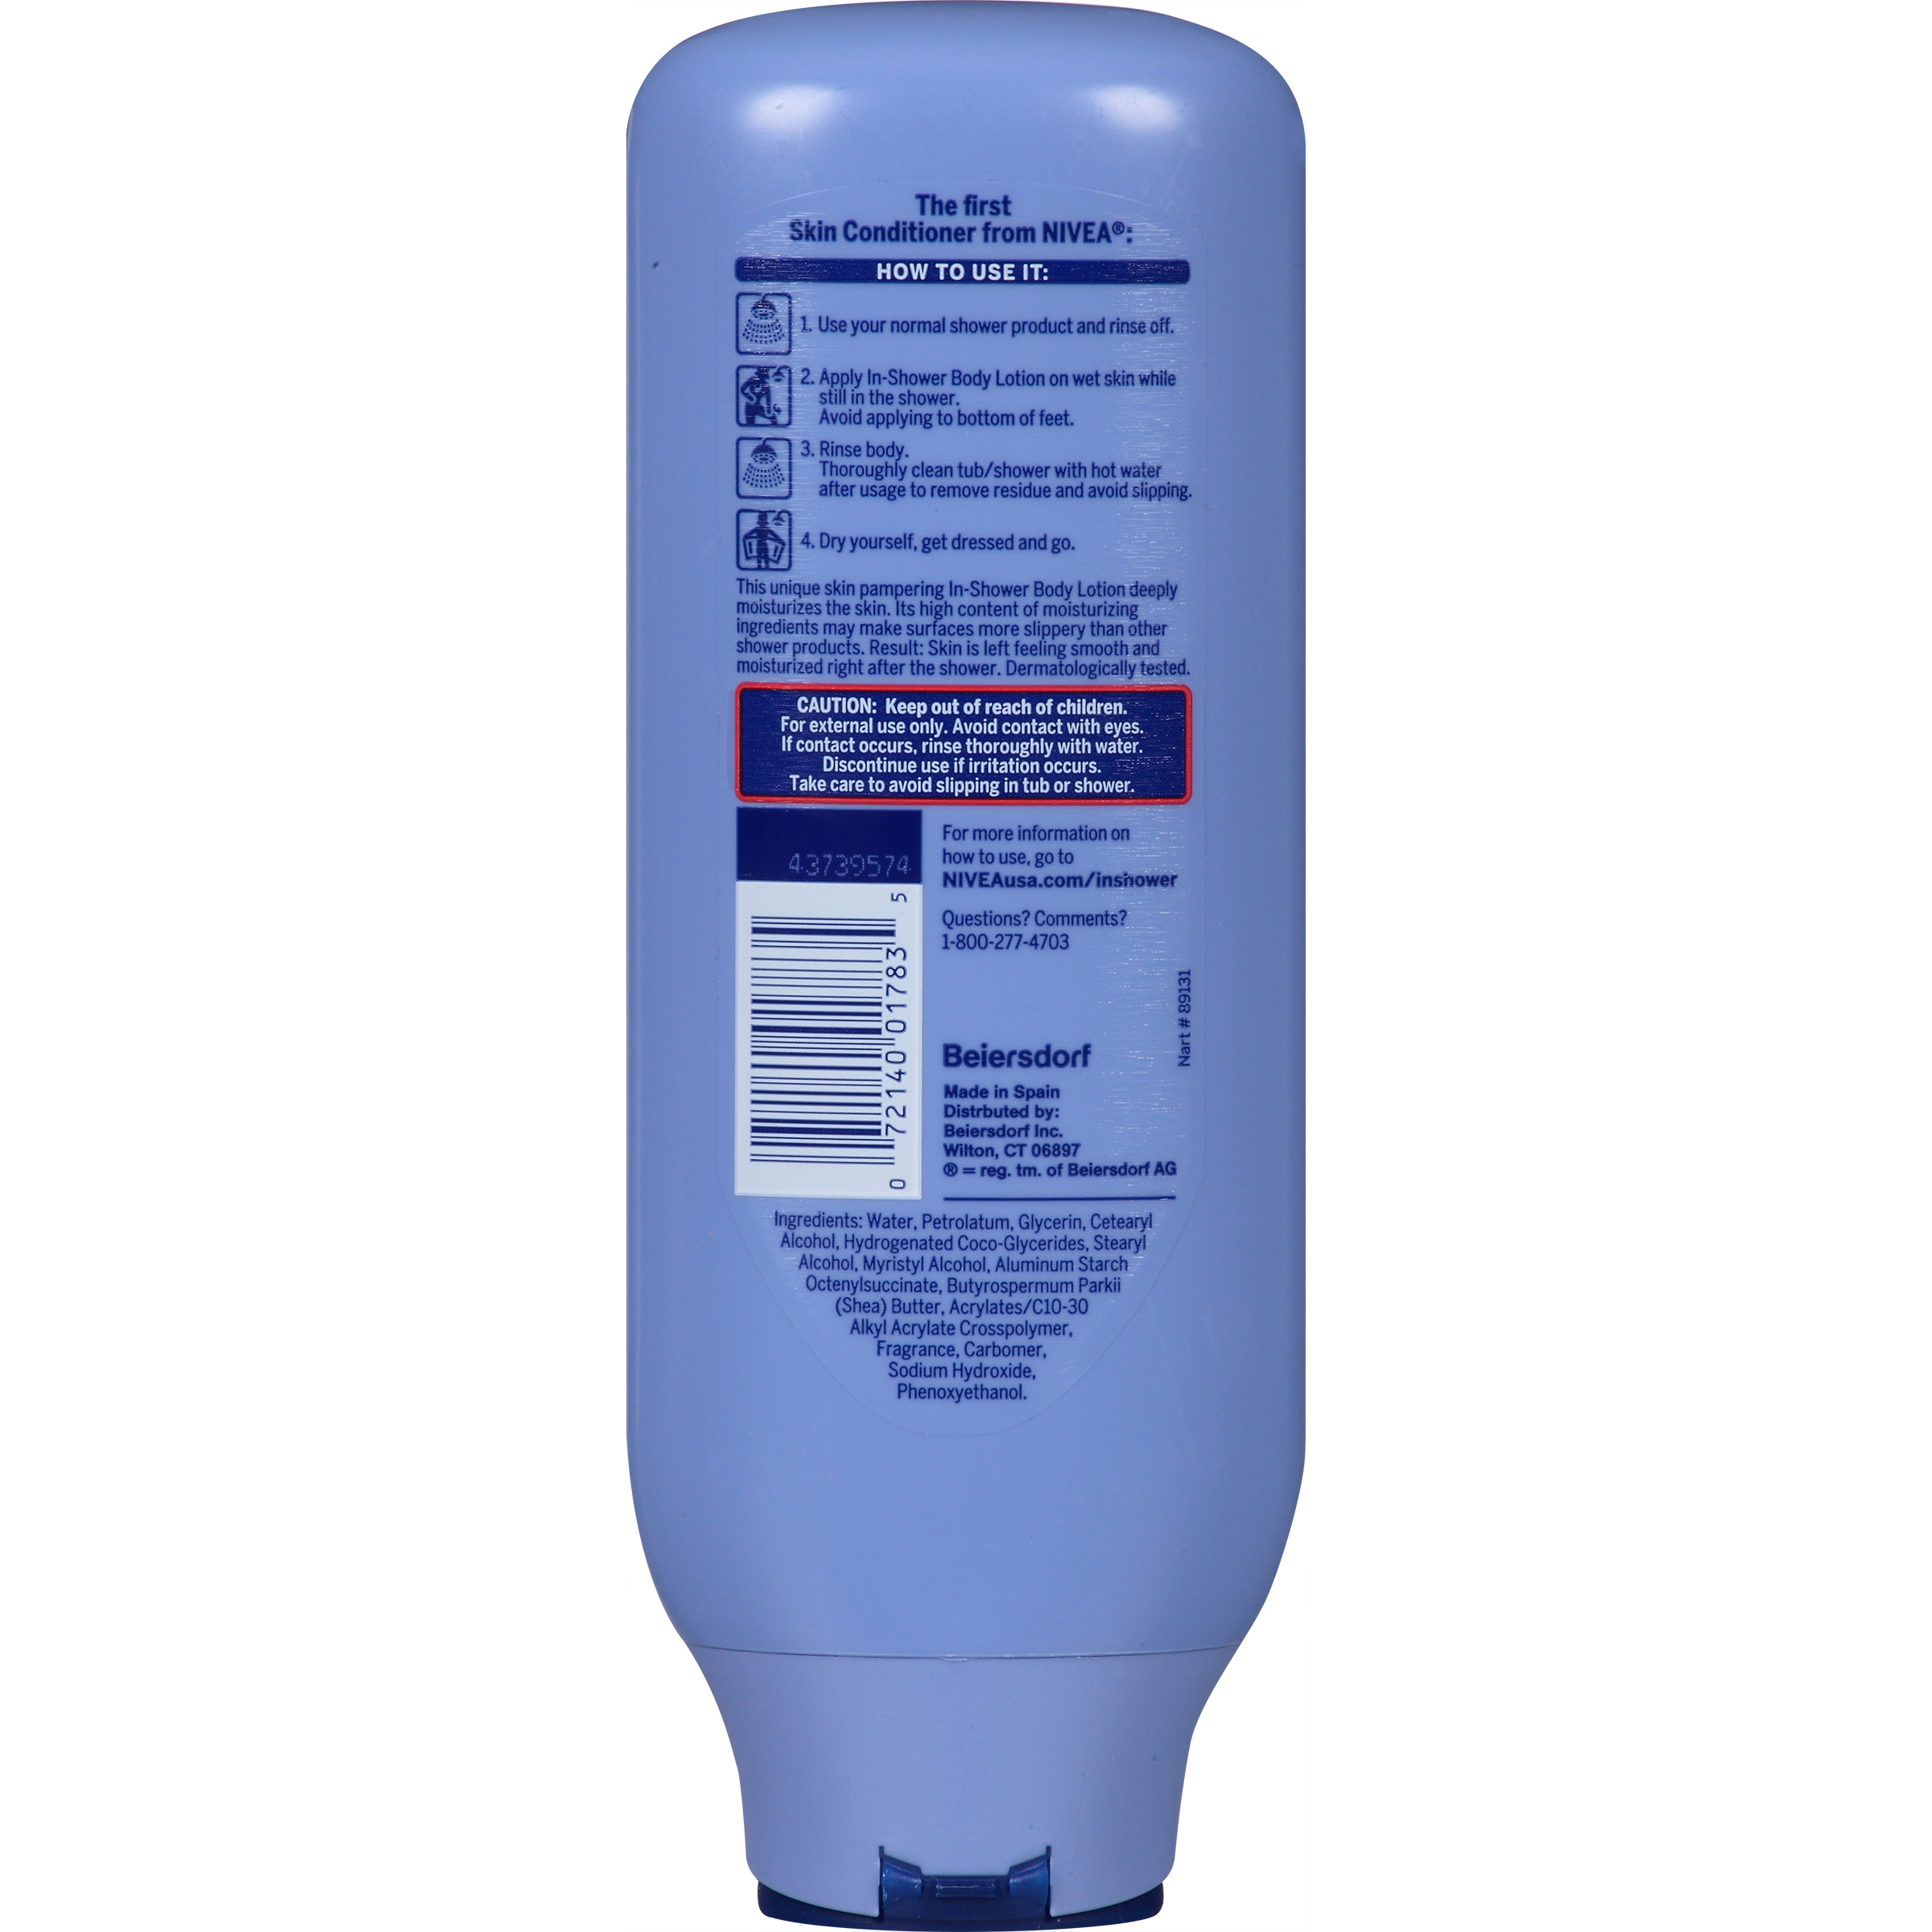 NIVEA In-Shower Smoothing Body Lotion 13.5 fl. oz. - image 2 of 3